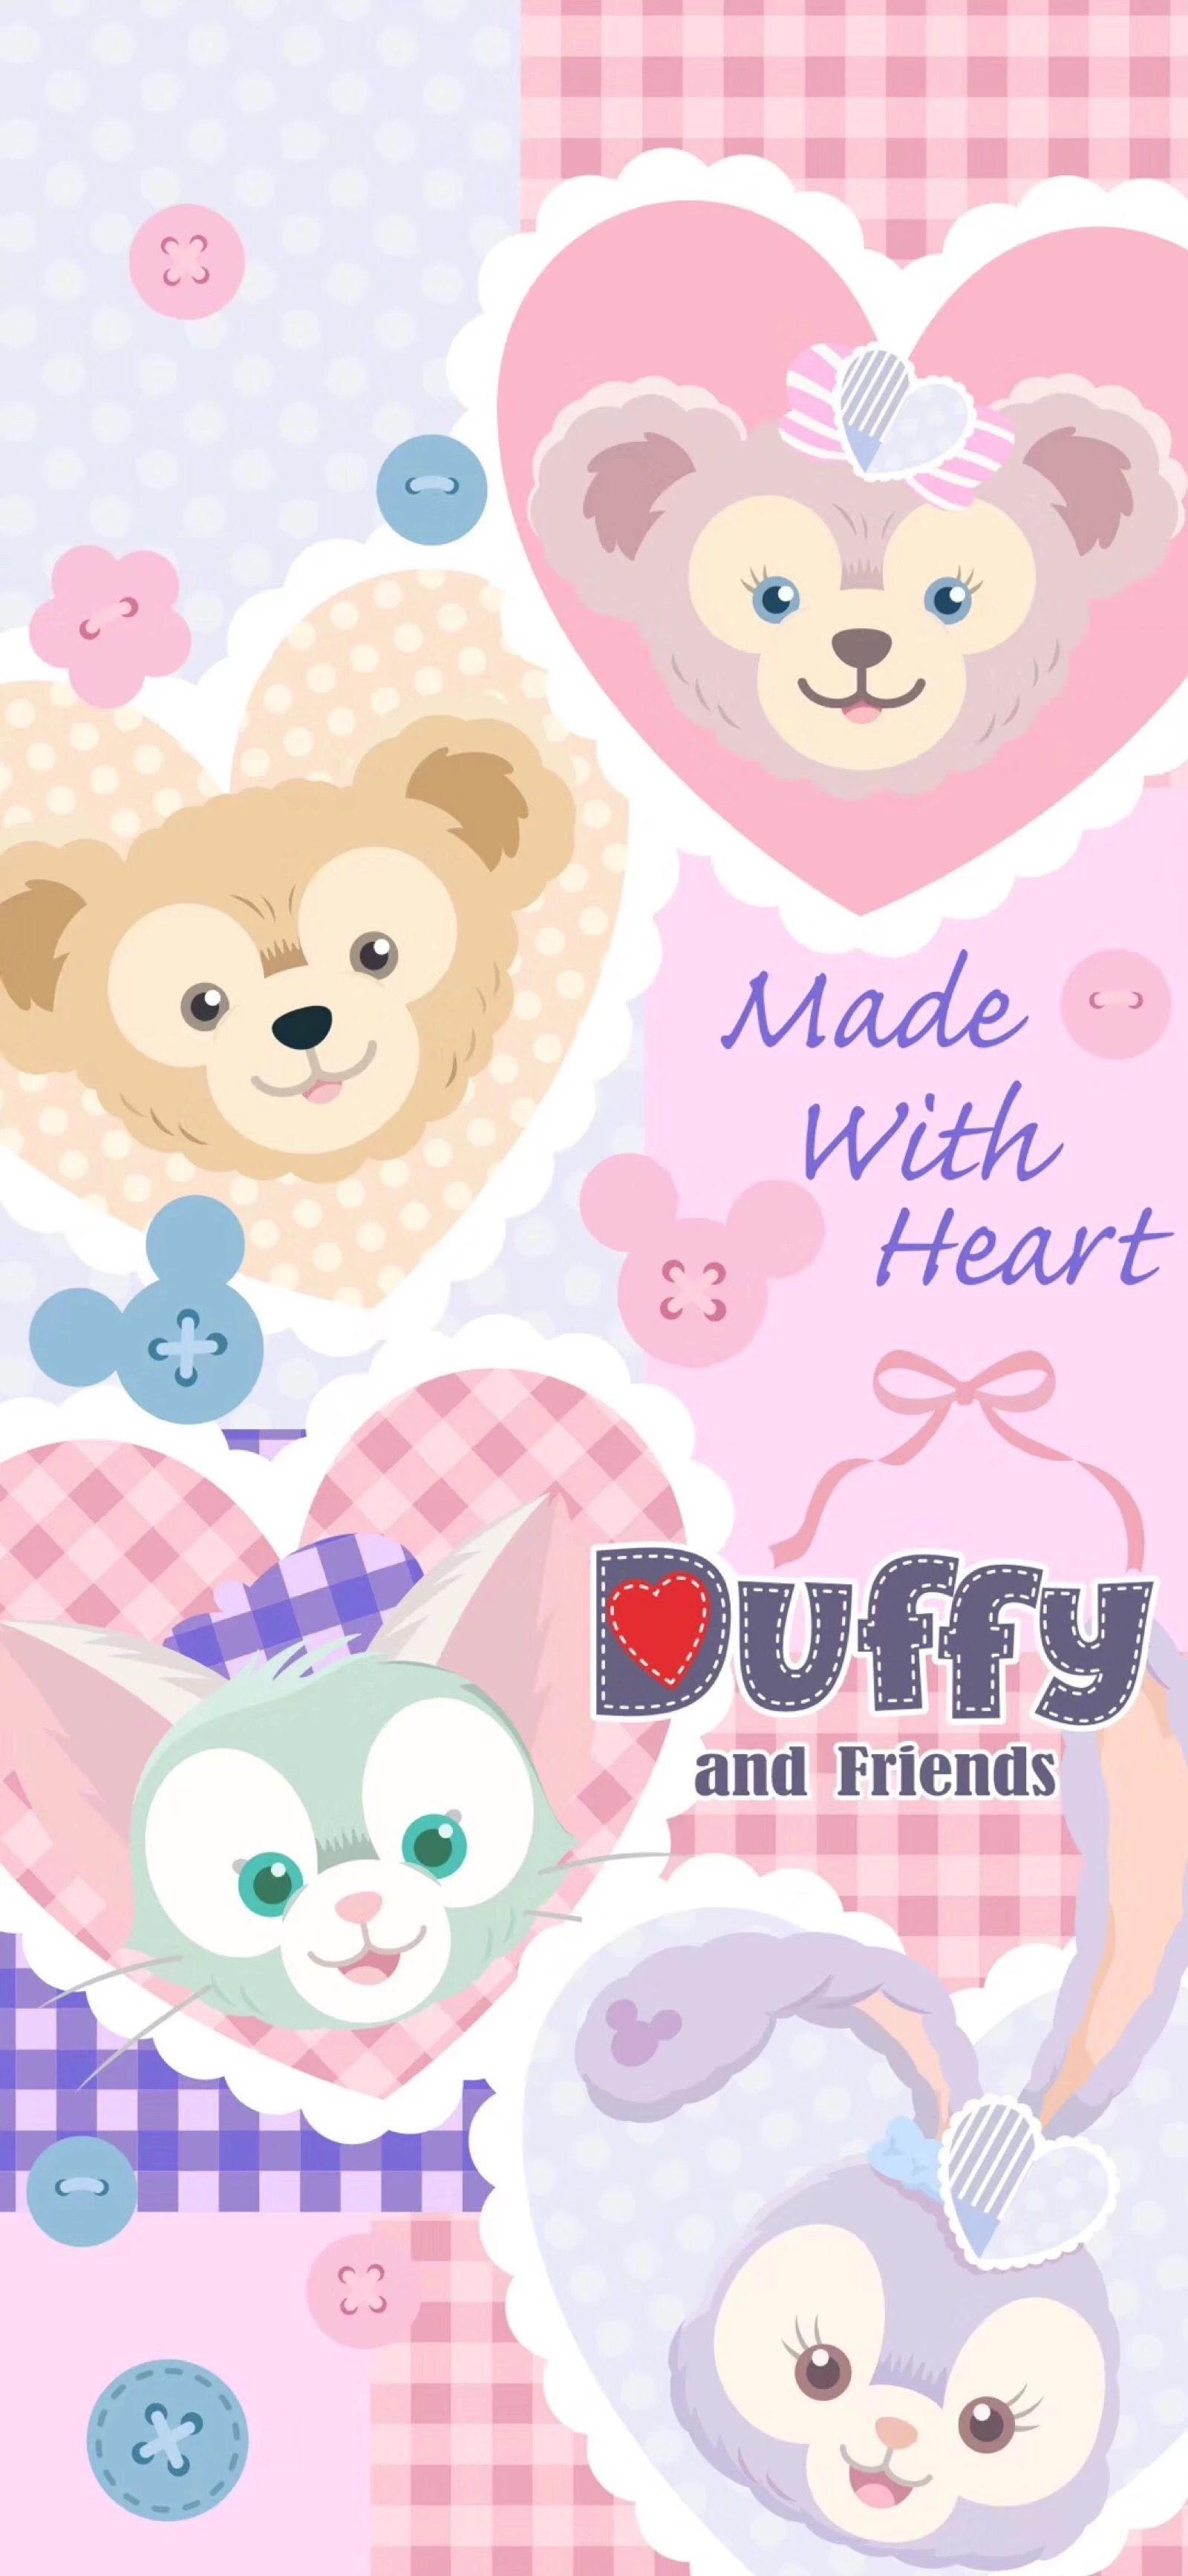 Duffy And Friends Wallpapers Top Free Duffy And Friends Backgrounds Wallpaperaccess